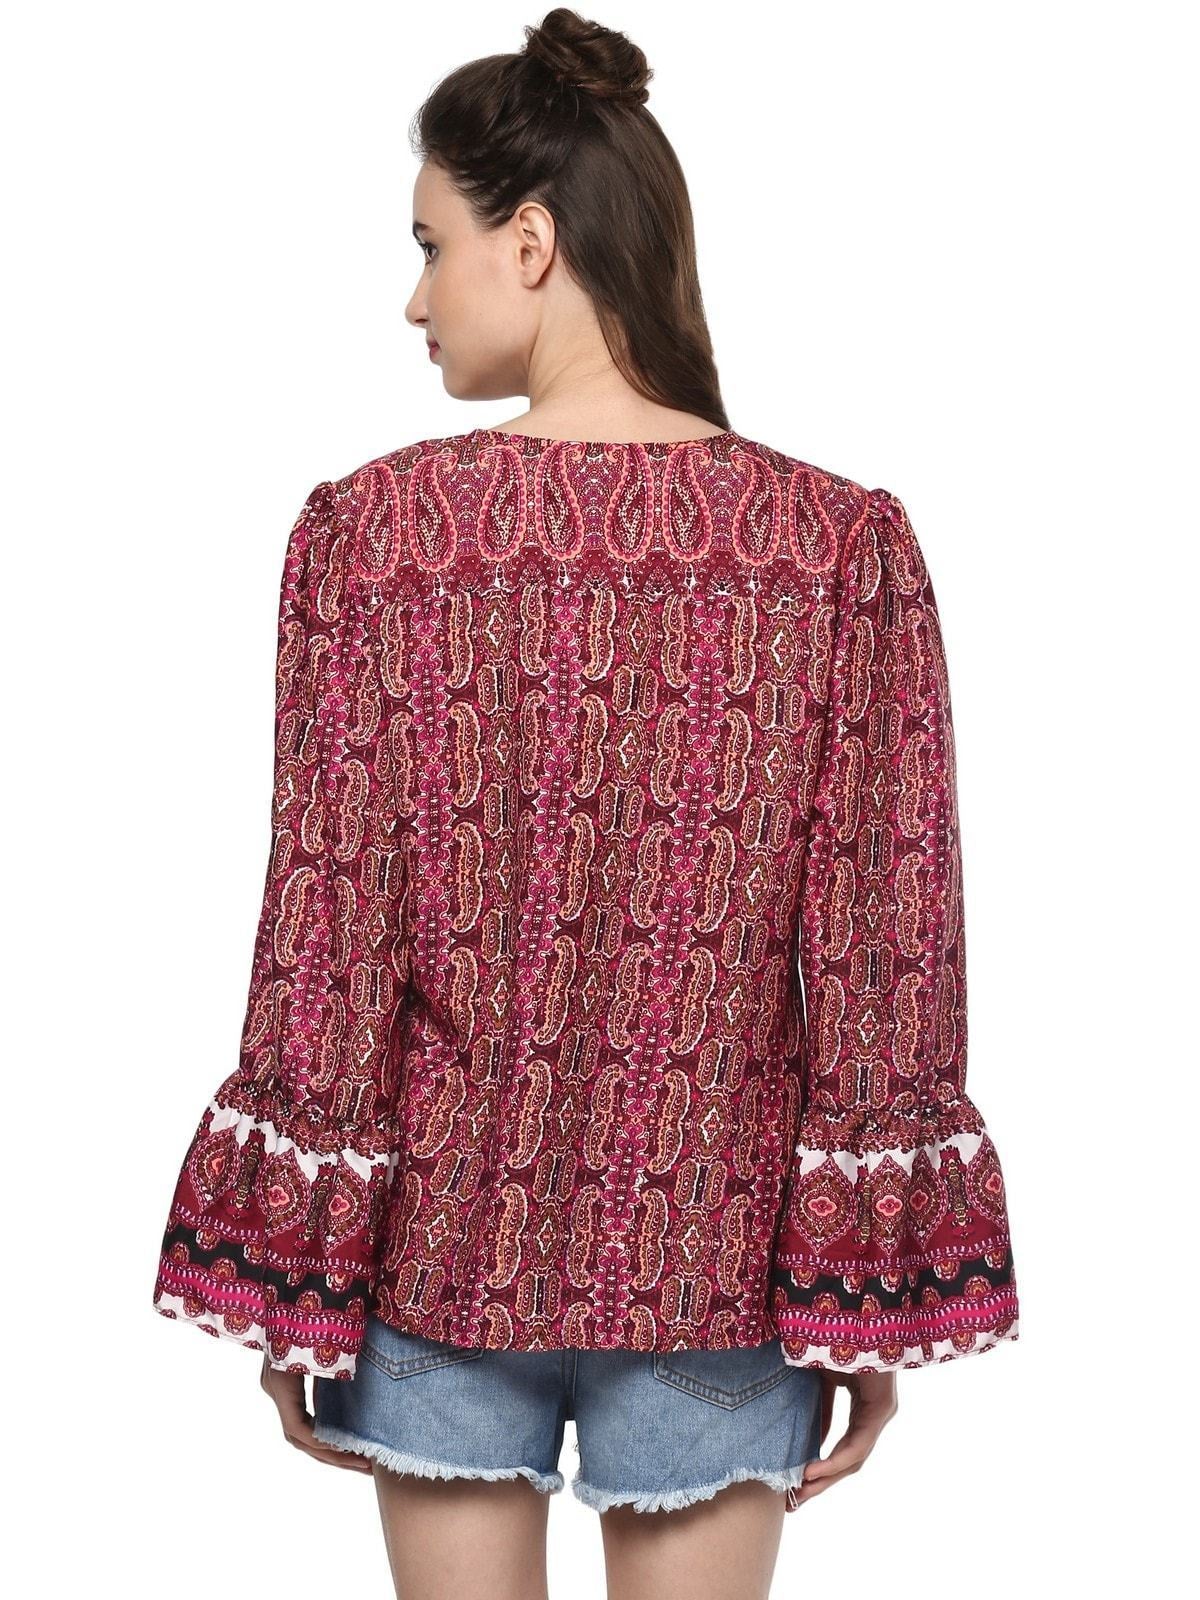 Women's Printed Front Tie-Up Top - Pannkh